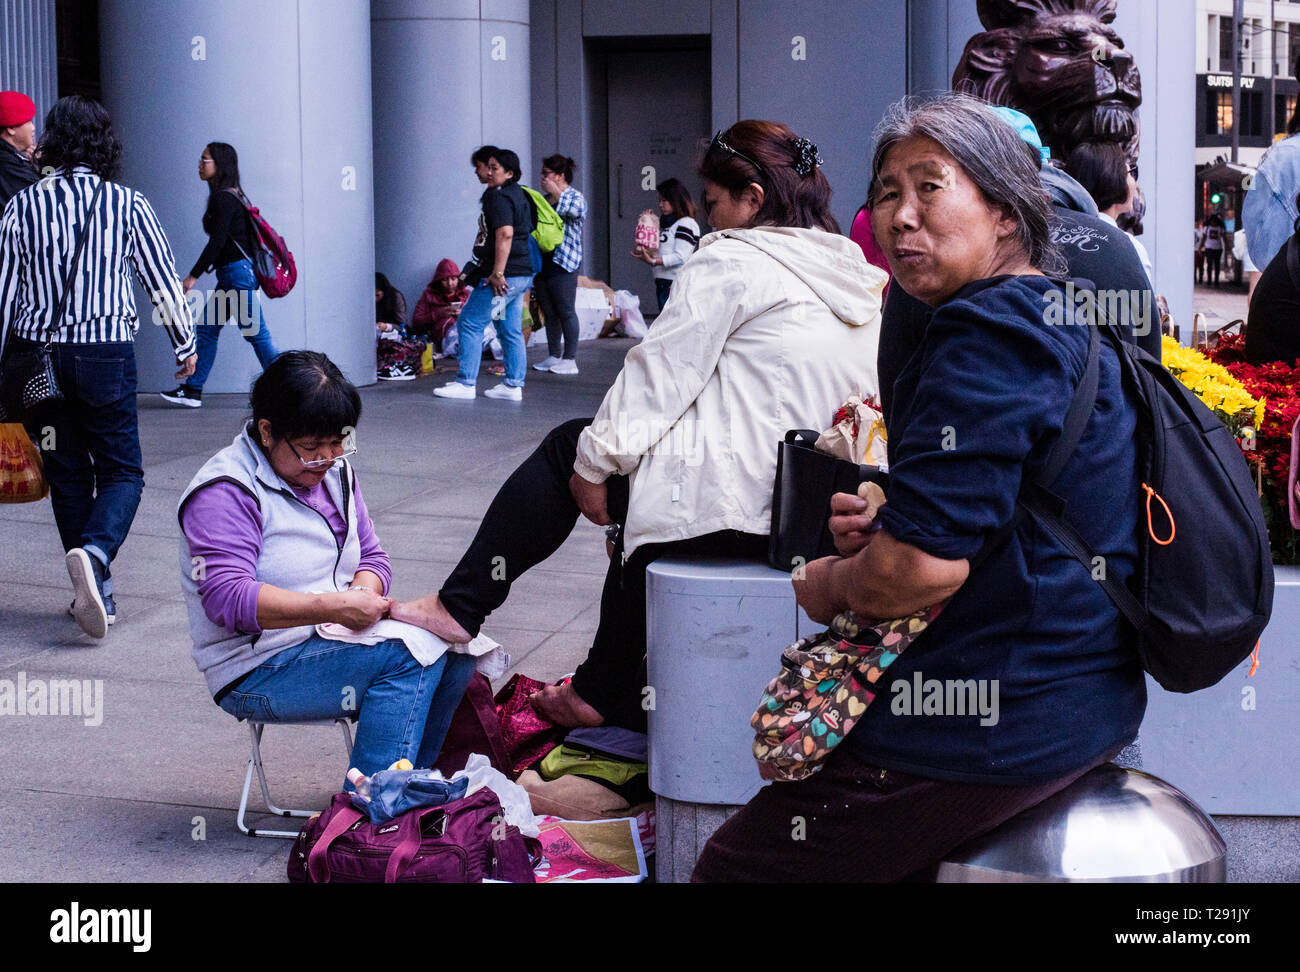 Woman having pedicure in busy street, older woman in foreground looking at camera, Kowloon, Hong Kong Stock Photo